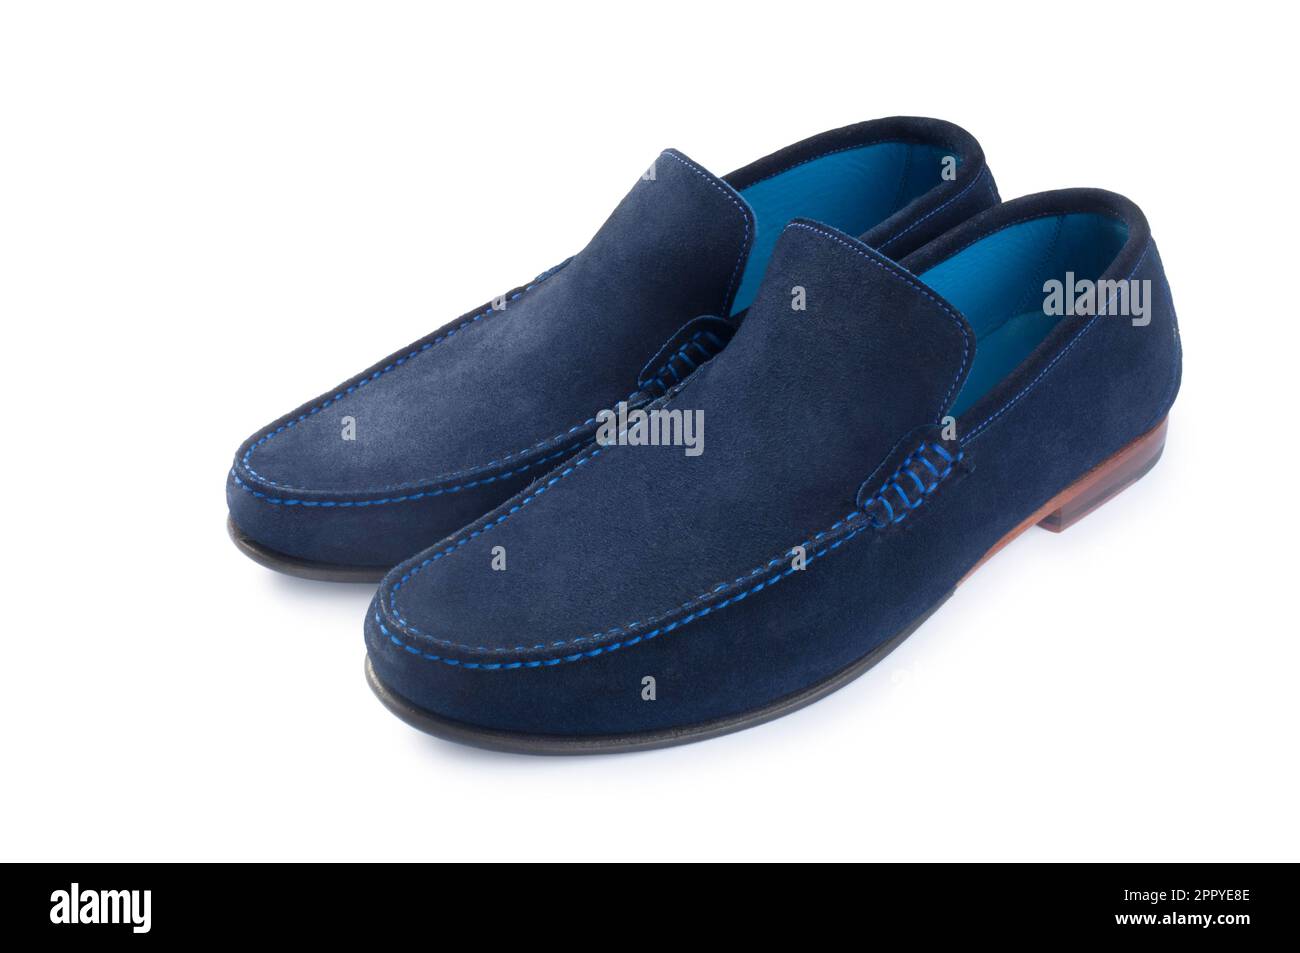 Studio shot of a pair of blue suede loafers cut out against a white background - John Gollop Stock Photo